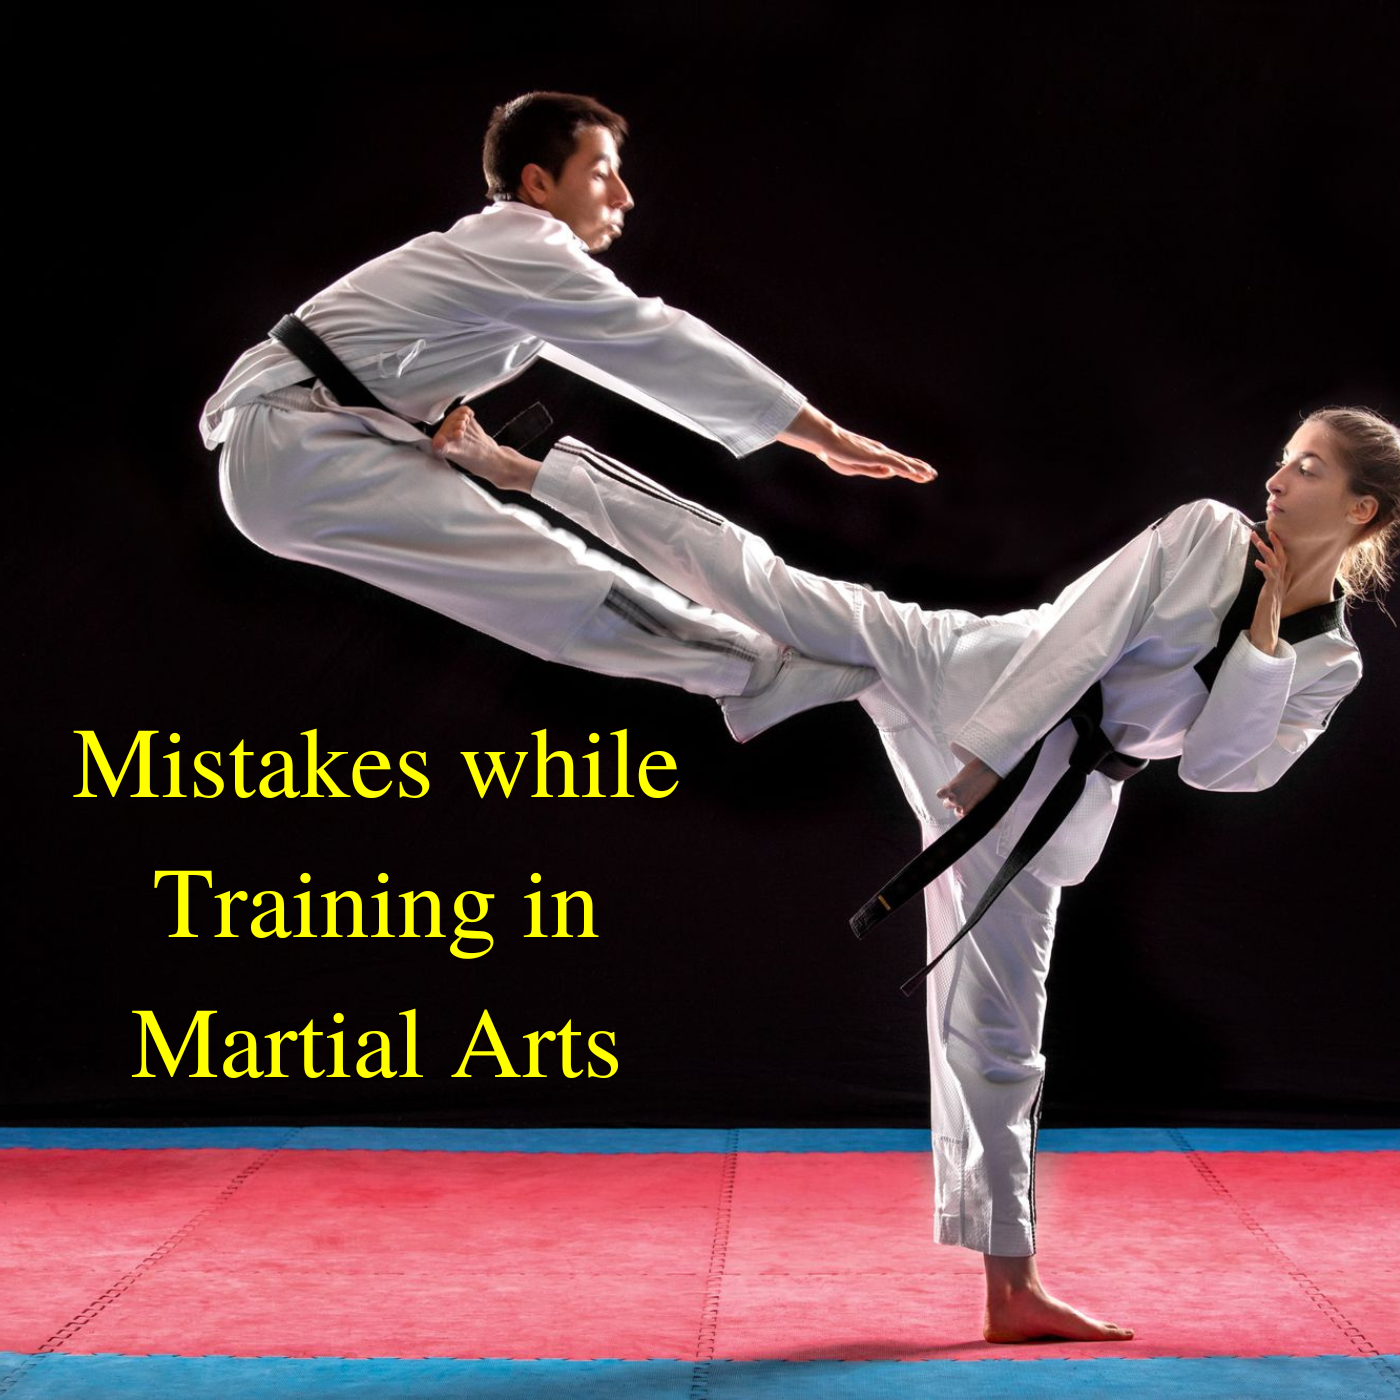 Mistakes while Training in Martial Arts